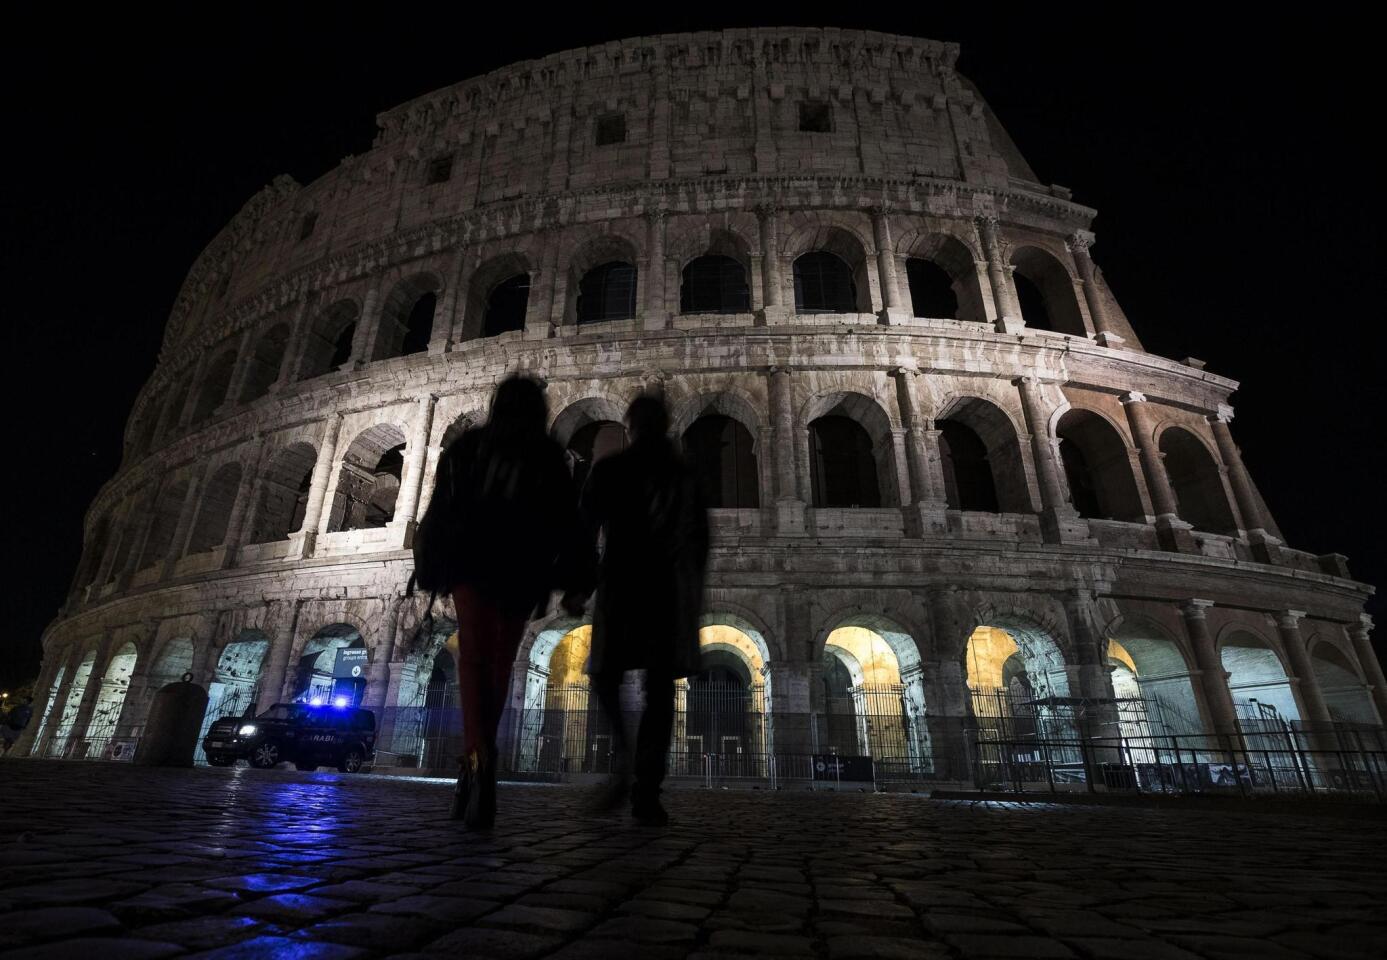 The lights are off at the ancient Colosseum in Rome on May 23, 2017, in tribute to the victims of the terrorist attack in Manchester, England.